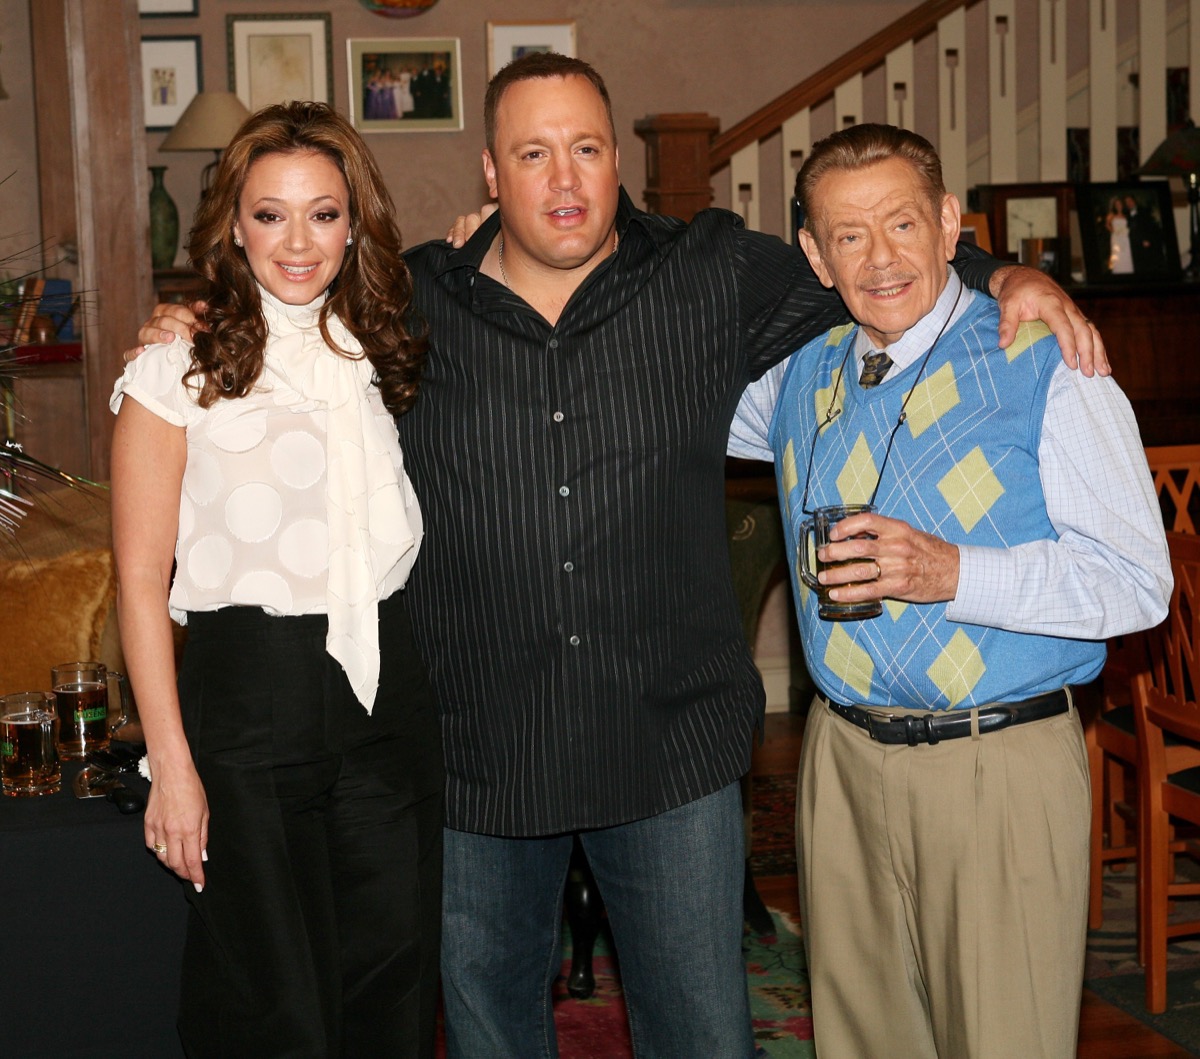 Leah Remini, Kevin James, and Jerry Stiller in 2007